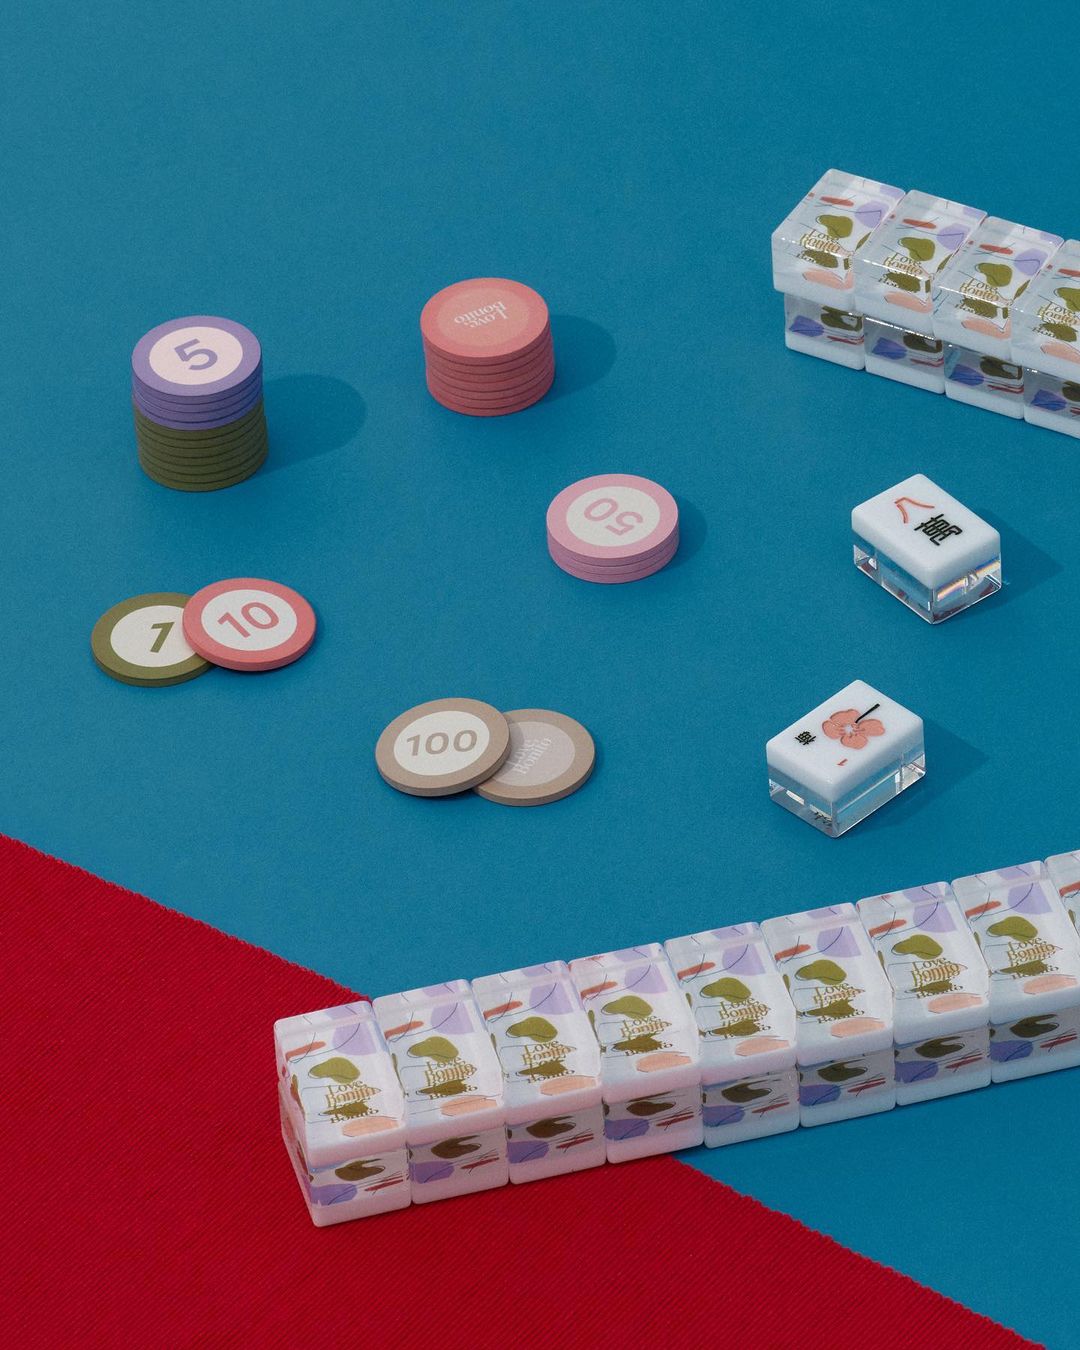 SUPERADRIANME — This beautiful mahjong table set was spotted at